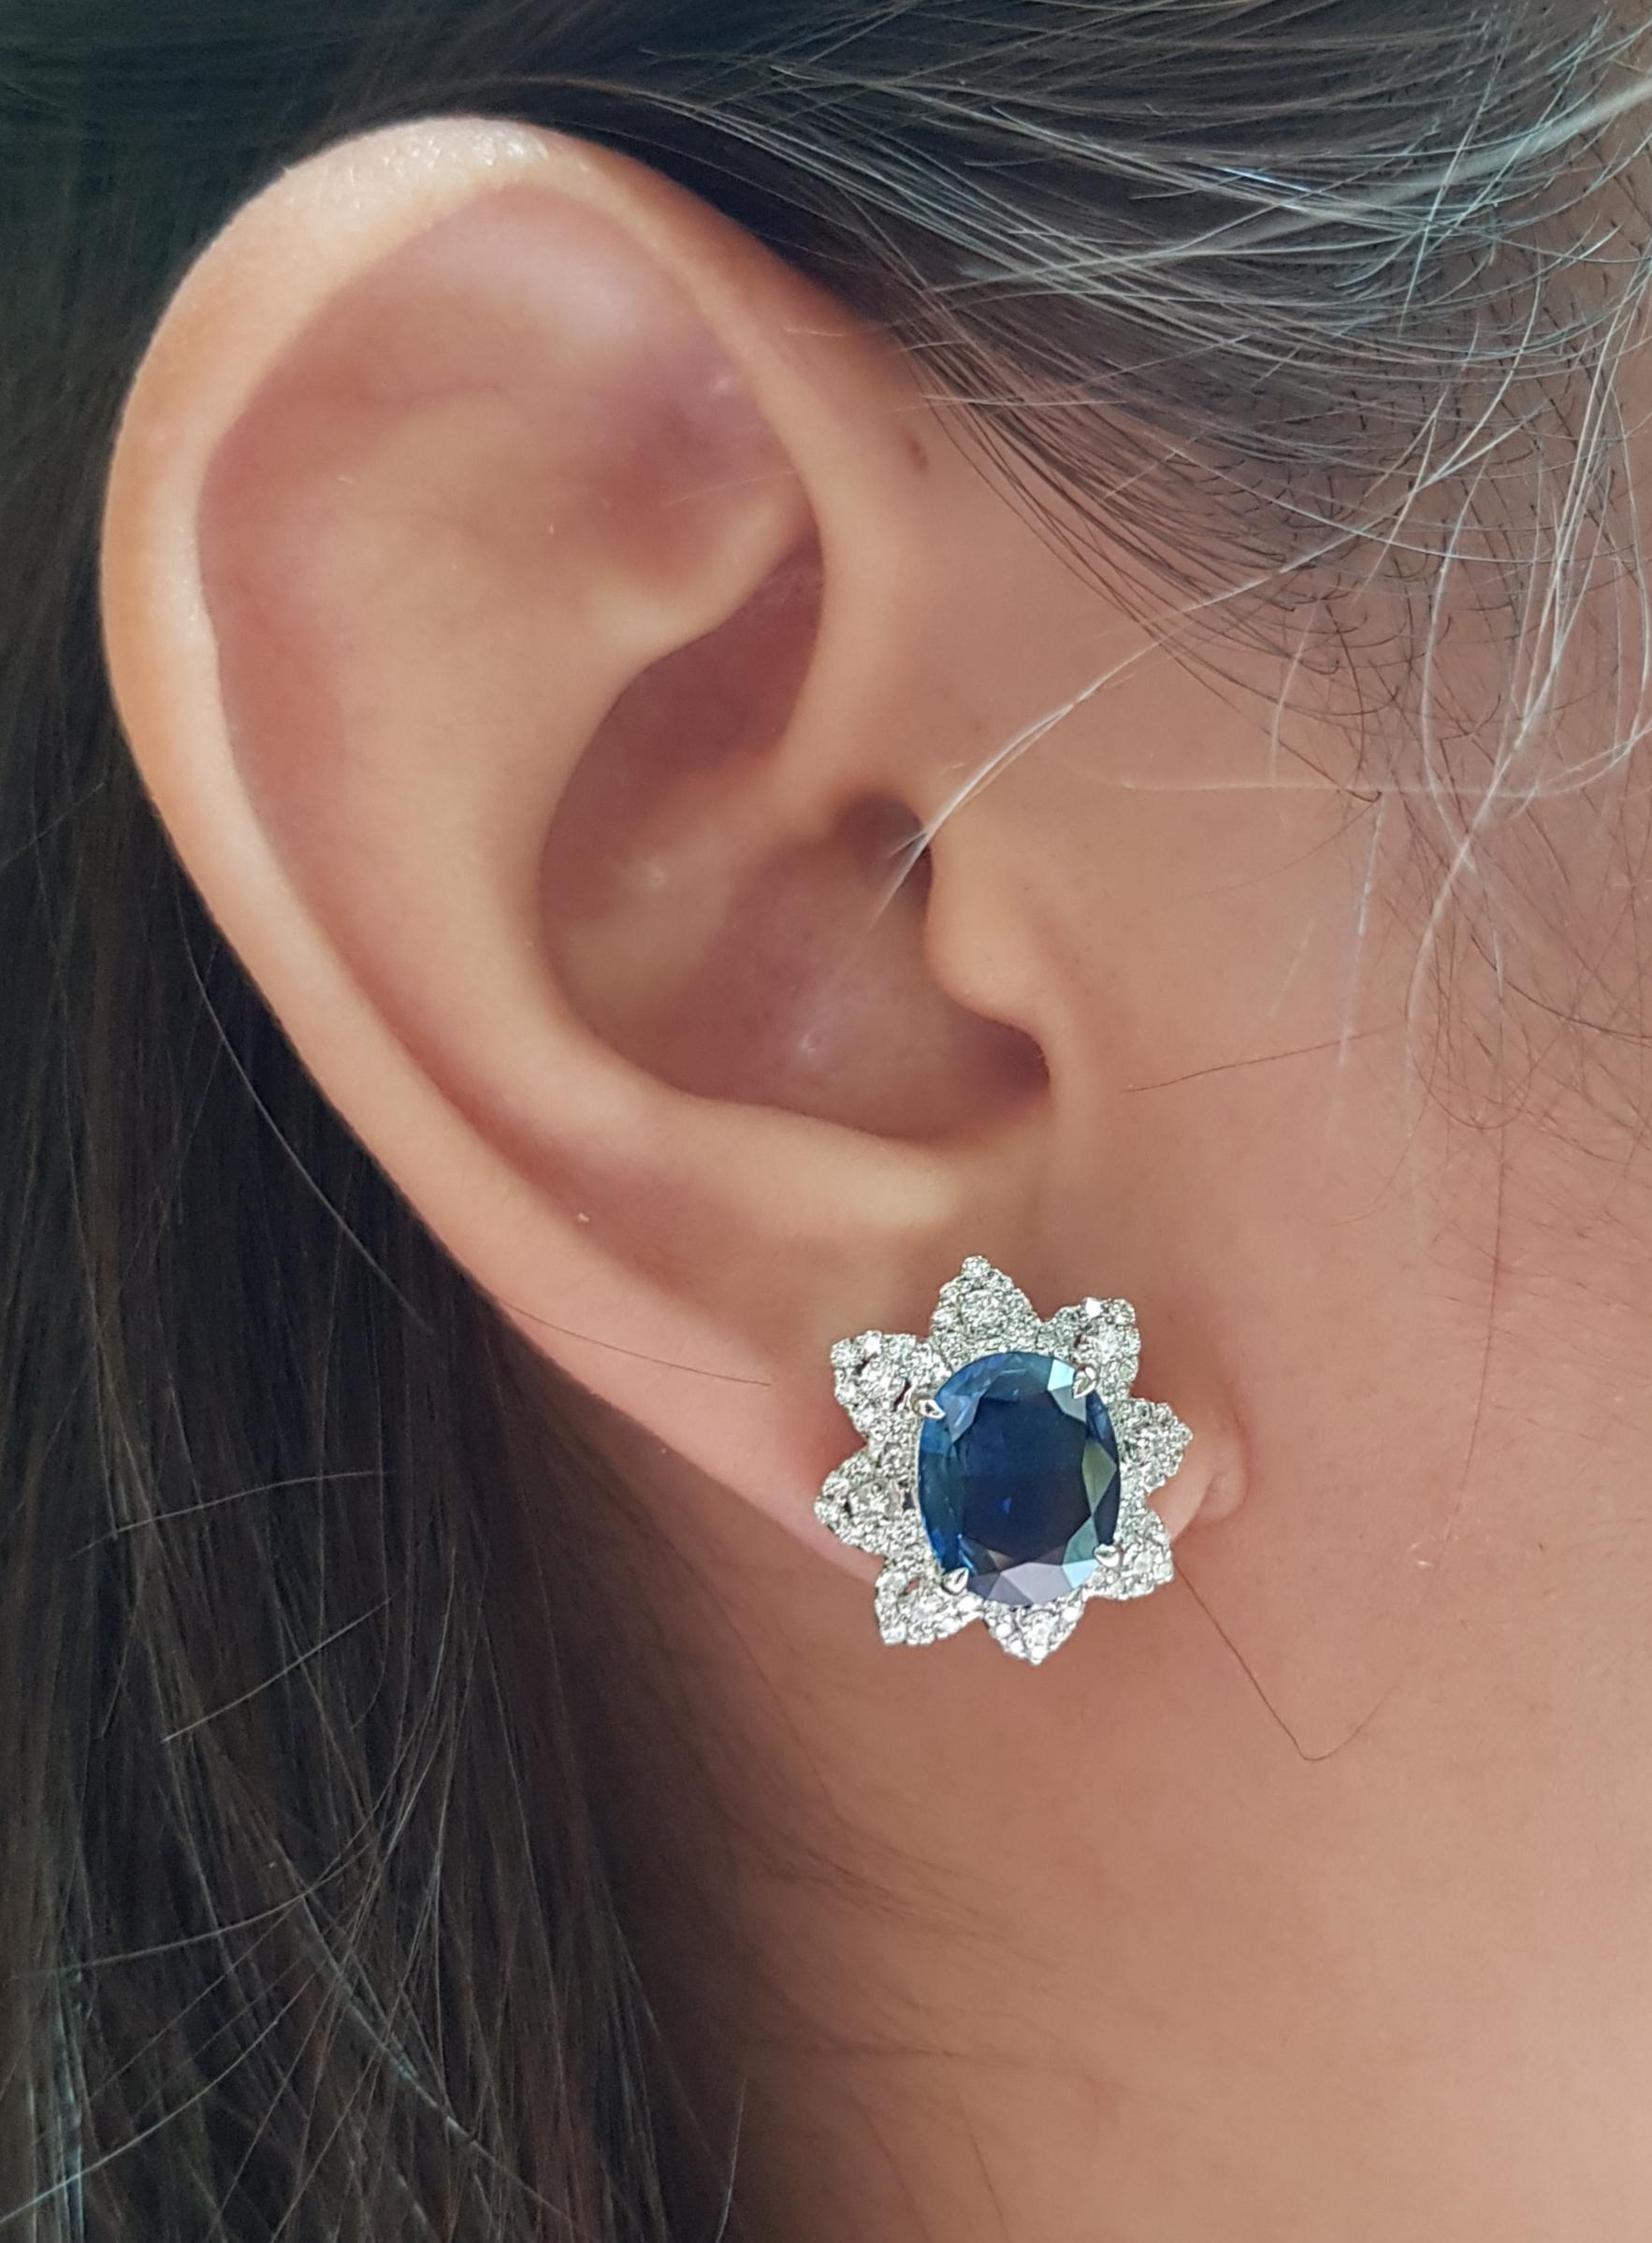 Blue Sapphire 5.57 carats with Diamond 0.88 carat Earrings set in 18 Karat White Gold Settings

Width:  1.5 cm 
Length: 1.7 cm
Total Weight: 10.46 grams

